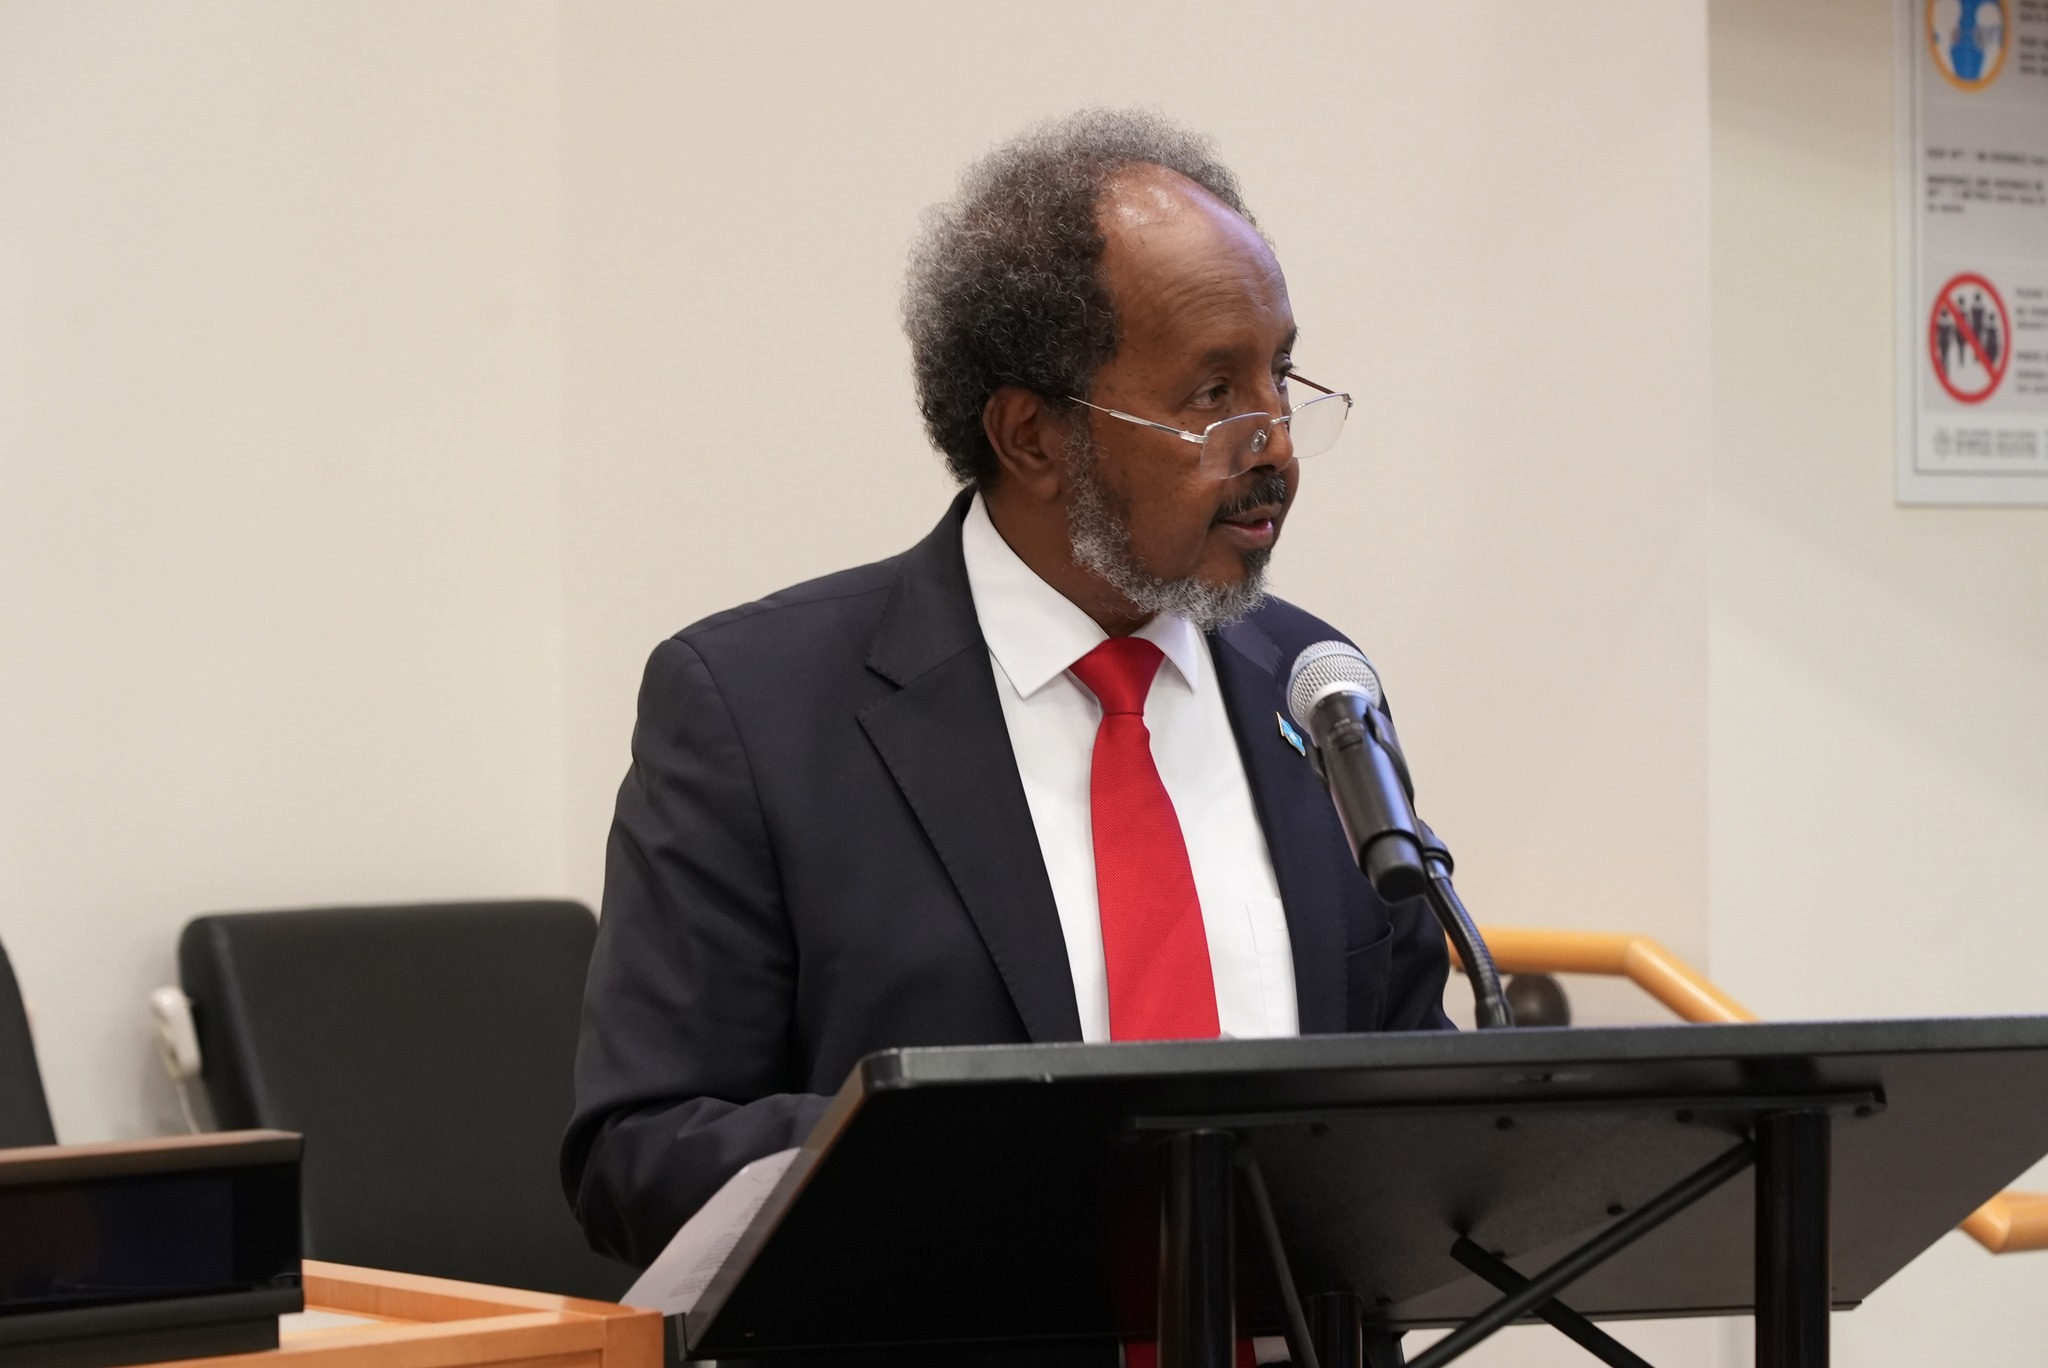 President Hassan Sheikh chairs the Somalia Security Conference in New York